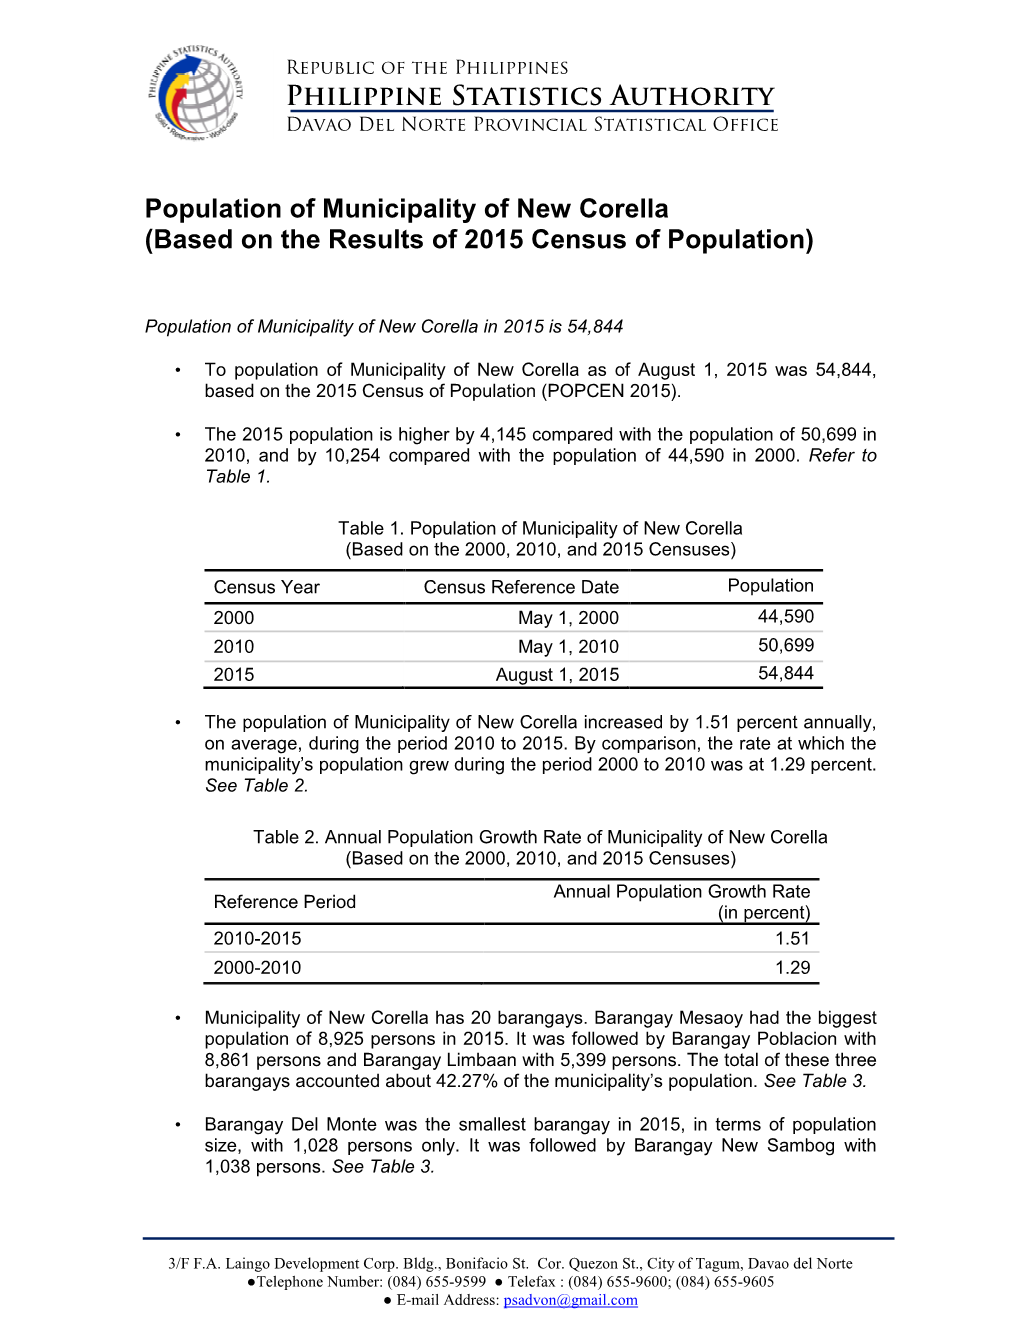 Population of Municipality of New Corella (Based on the Results of 2015 Census of Population)